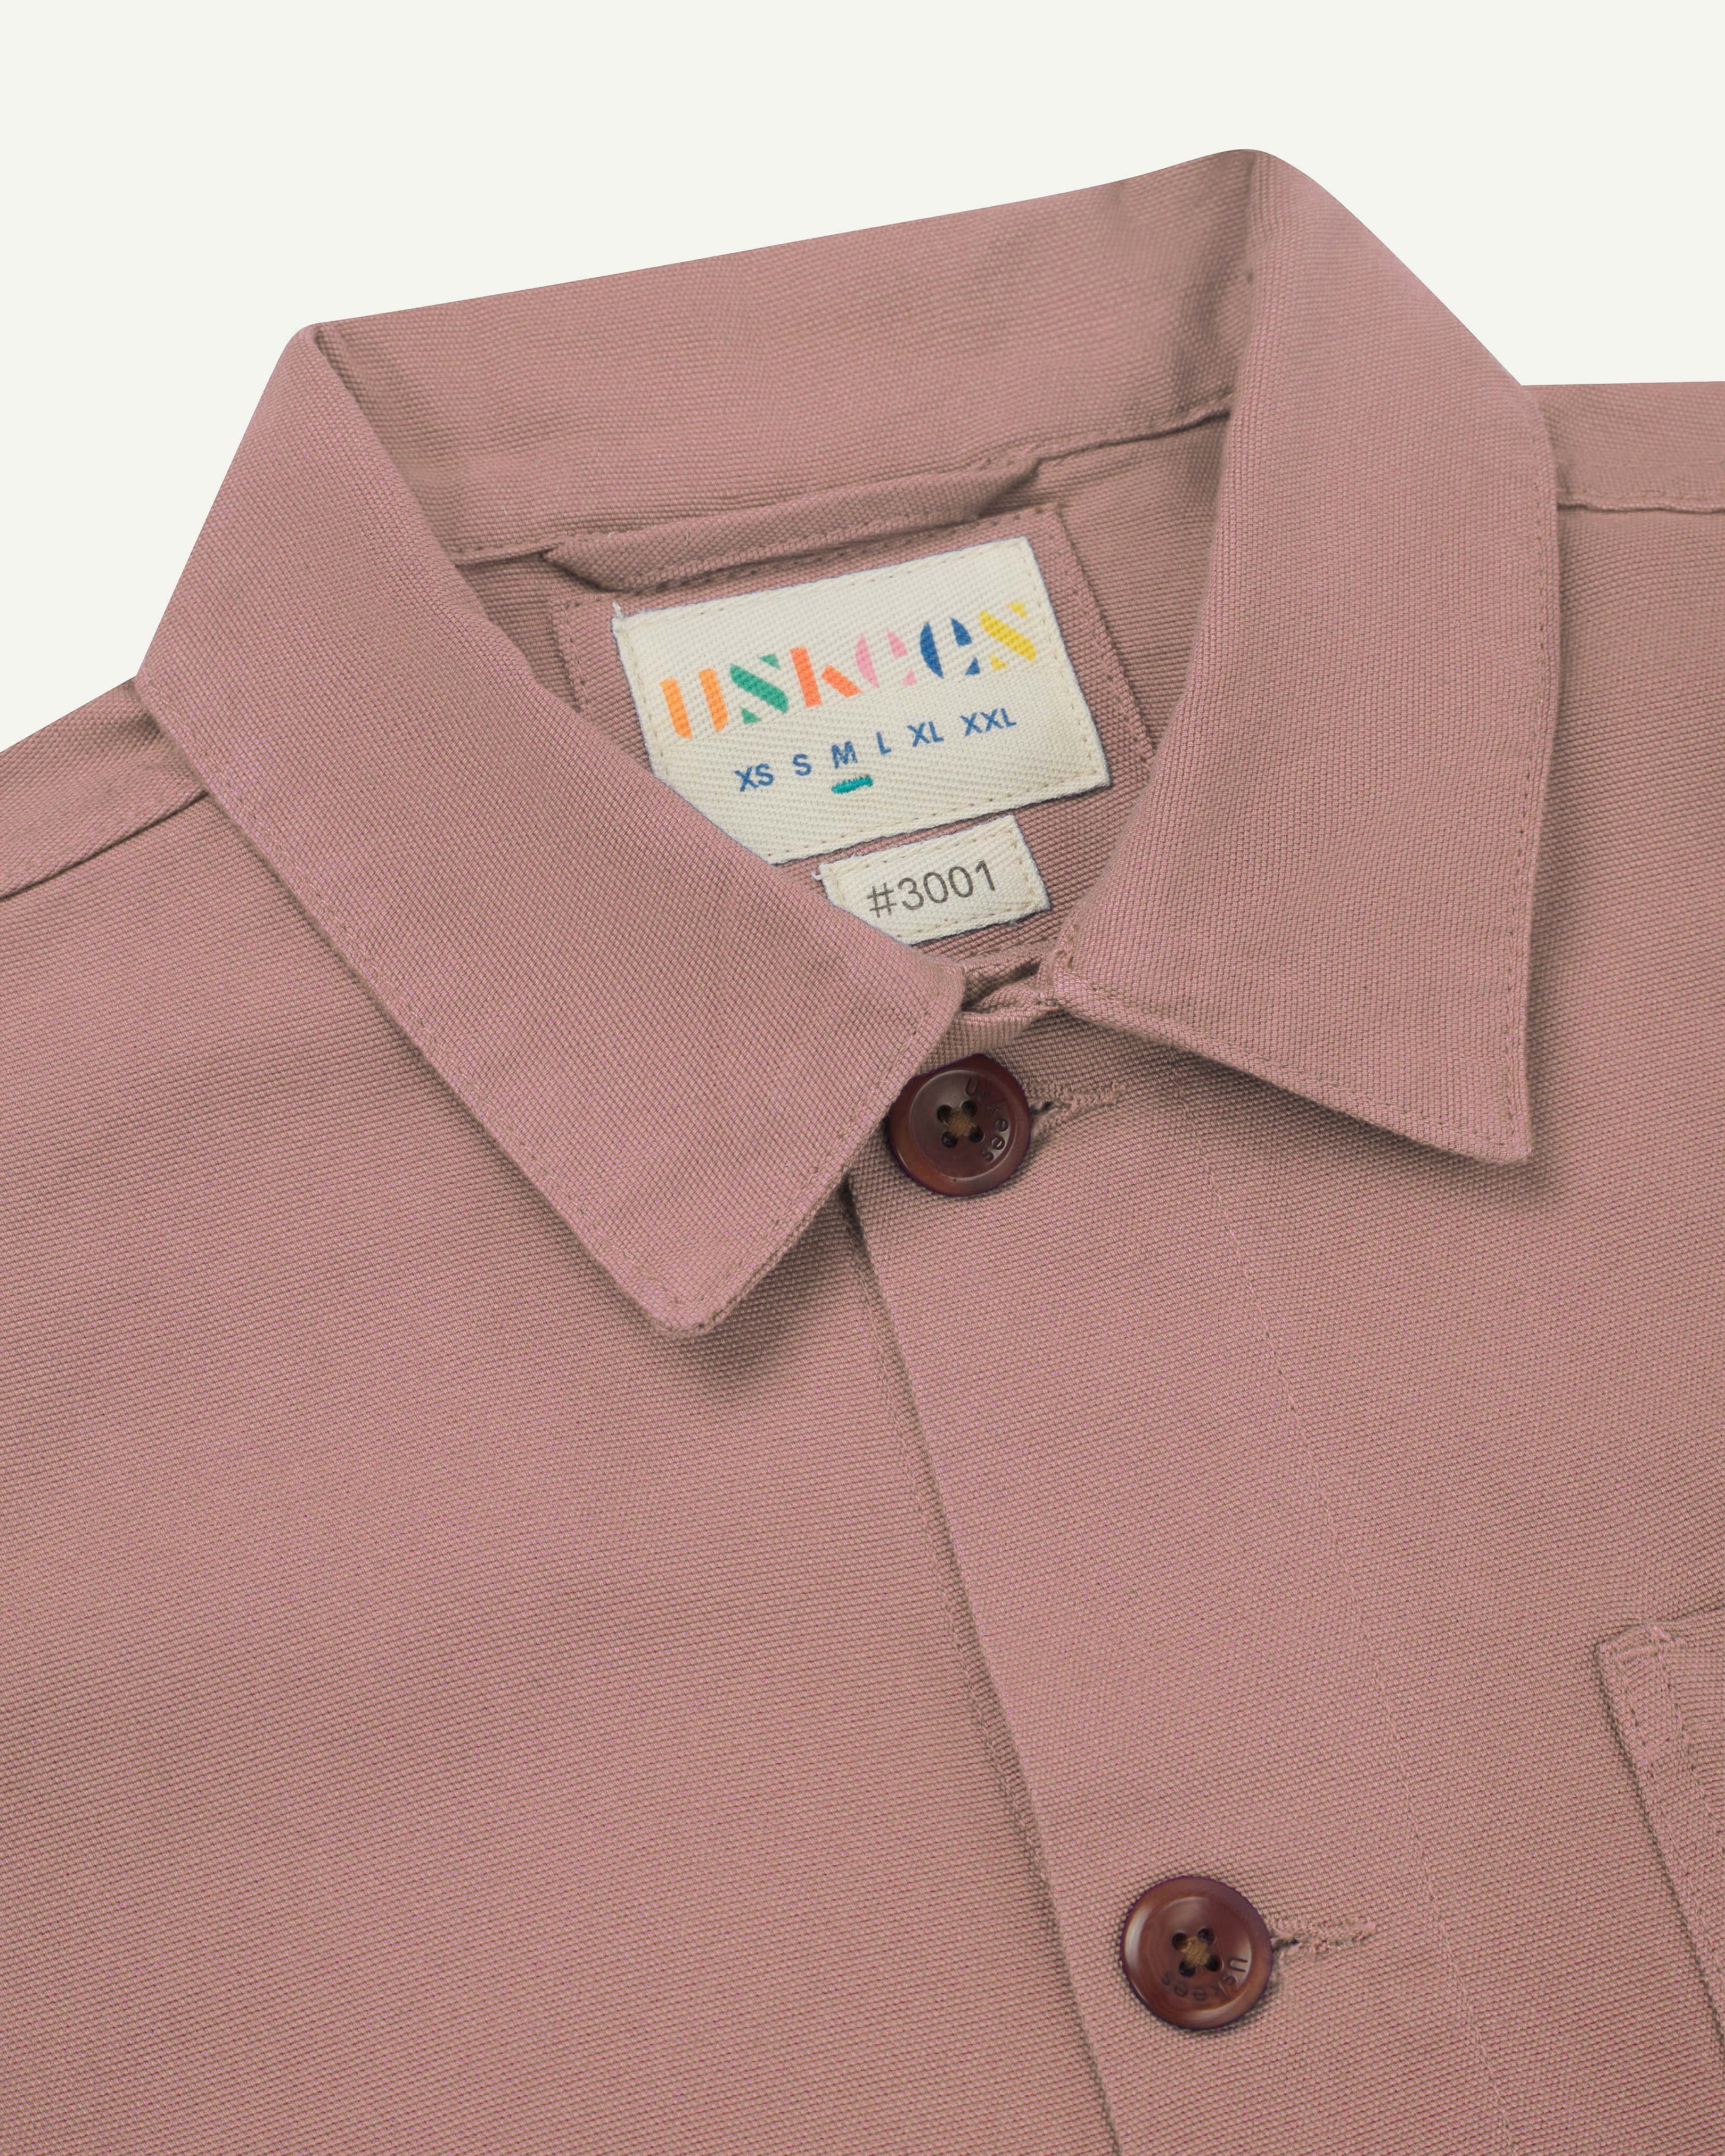 Front close-up shot of an uskees pale pink men's overshirt showing neck brand/size label, contrast brown corozo buttons and brand label at neck.